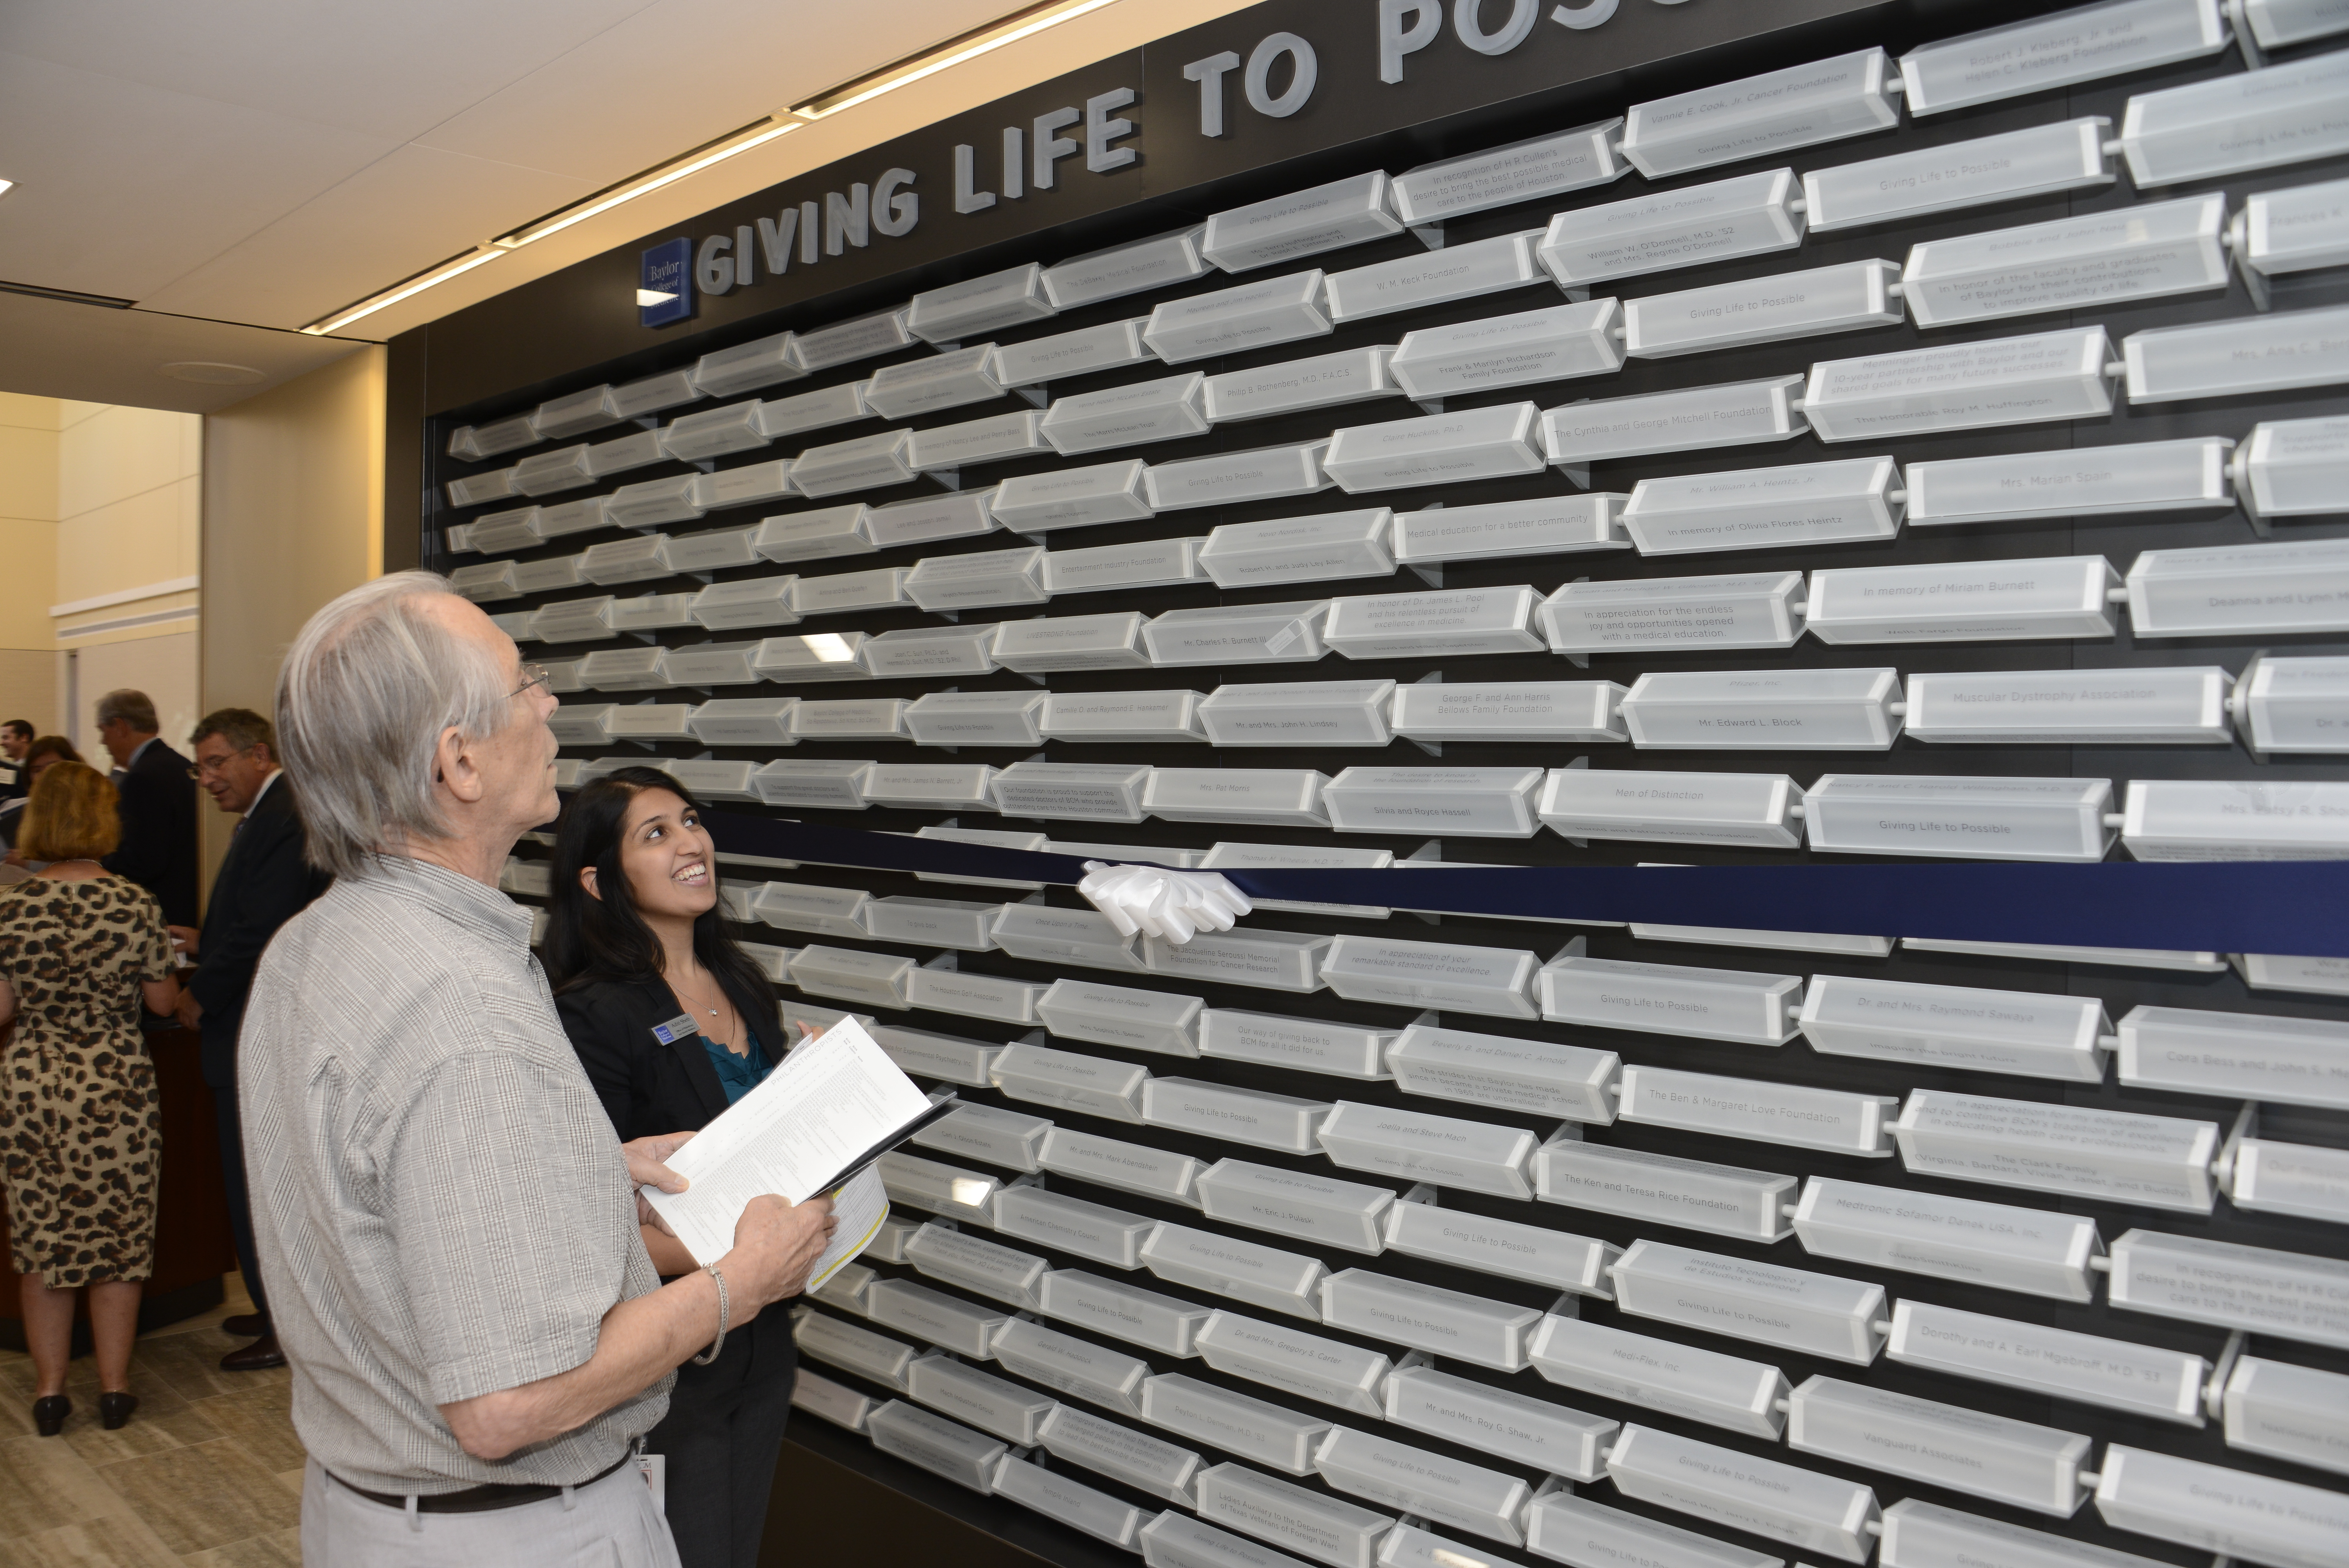 The Donor Wall at the Baylor St. Luke’s Medical Center, McNair Campus